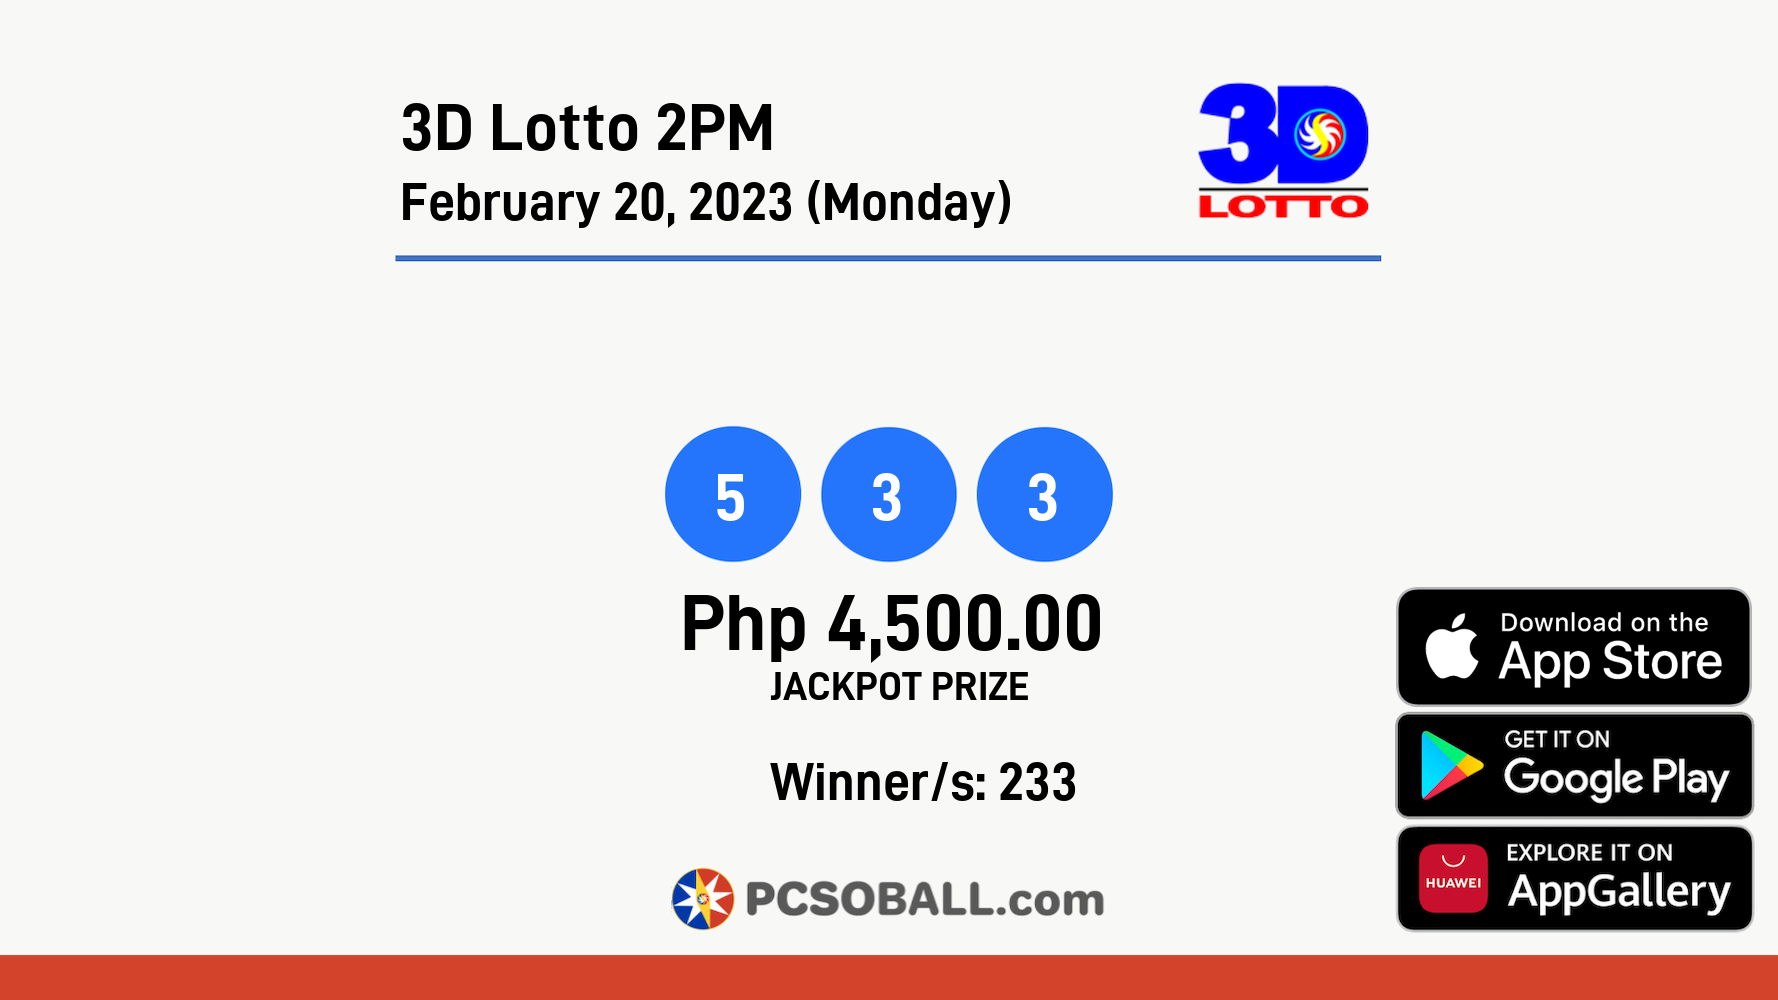 3D Lotto 2PM February 20, 2023 (Monday) Result